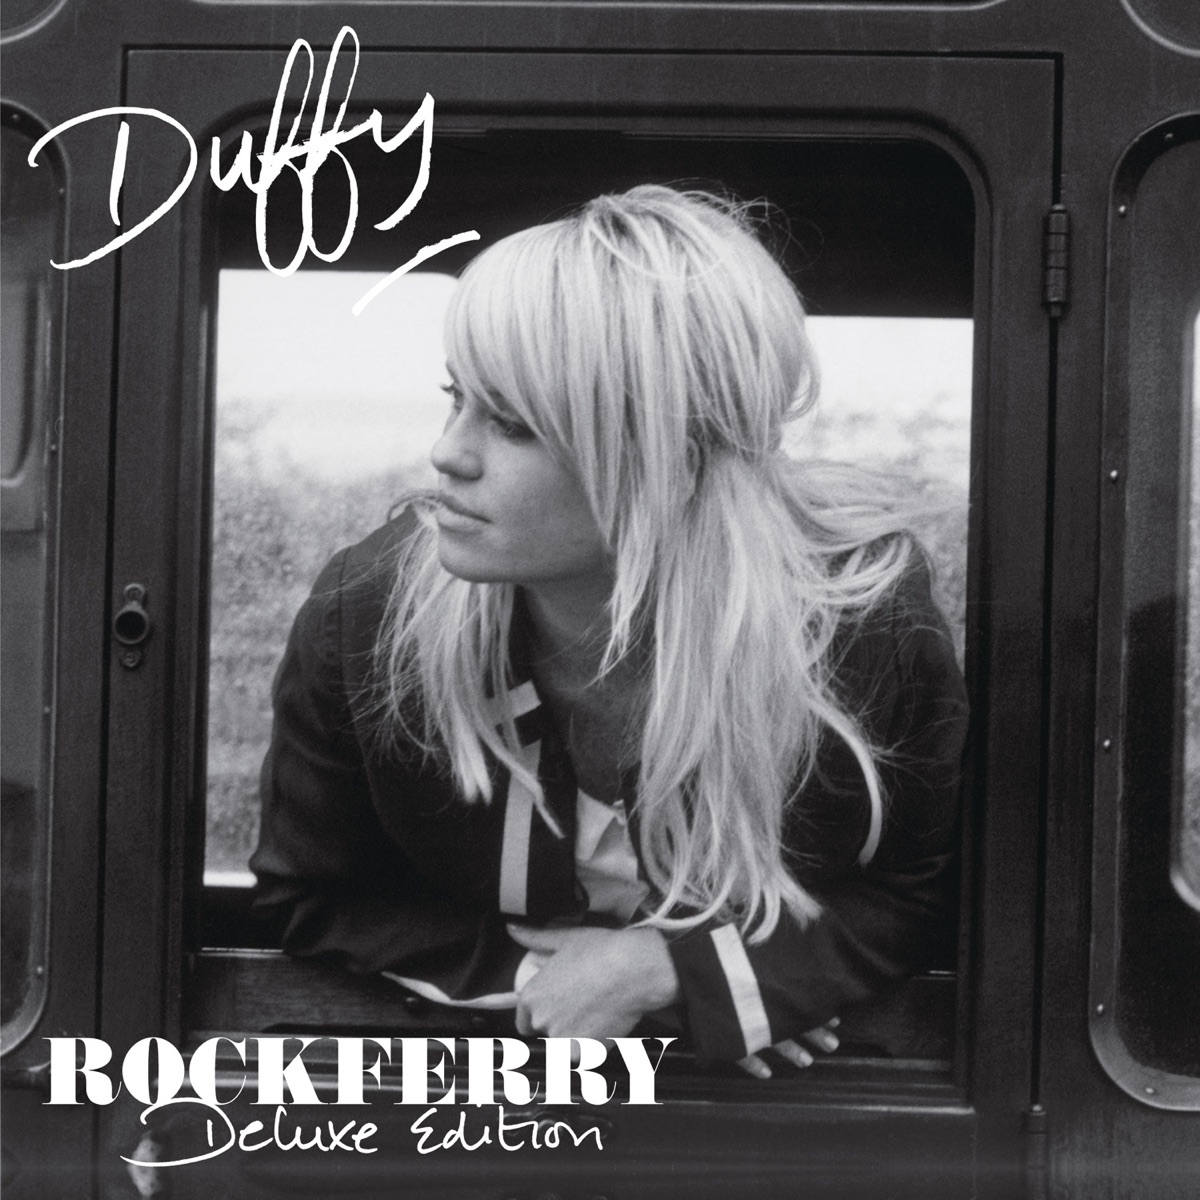 shampoo fra nu af Persona Rockferry (Deluxe Edition) by Duffy on Apple Music